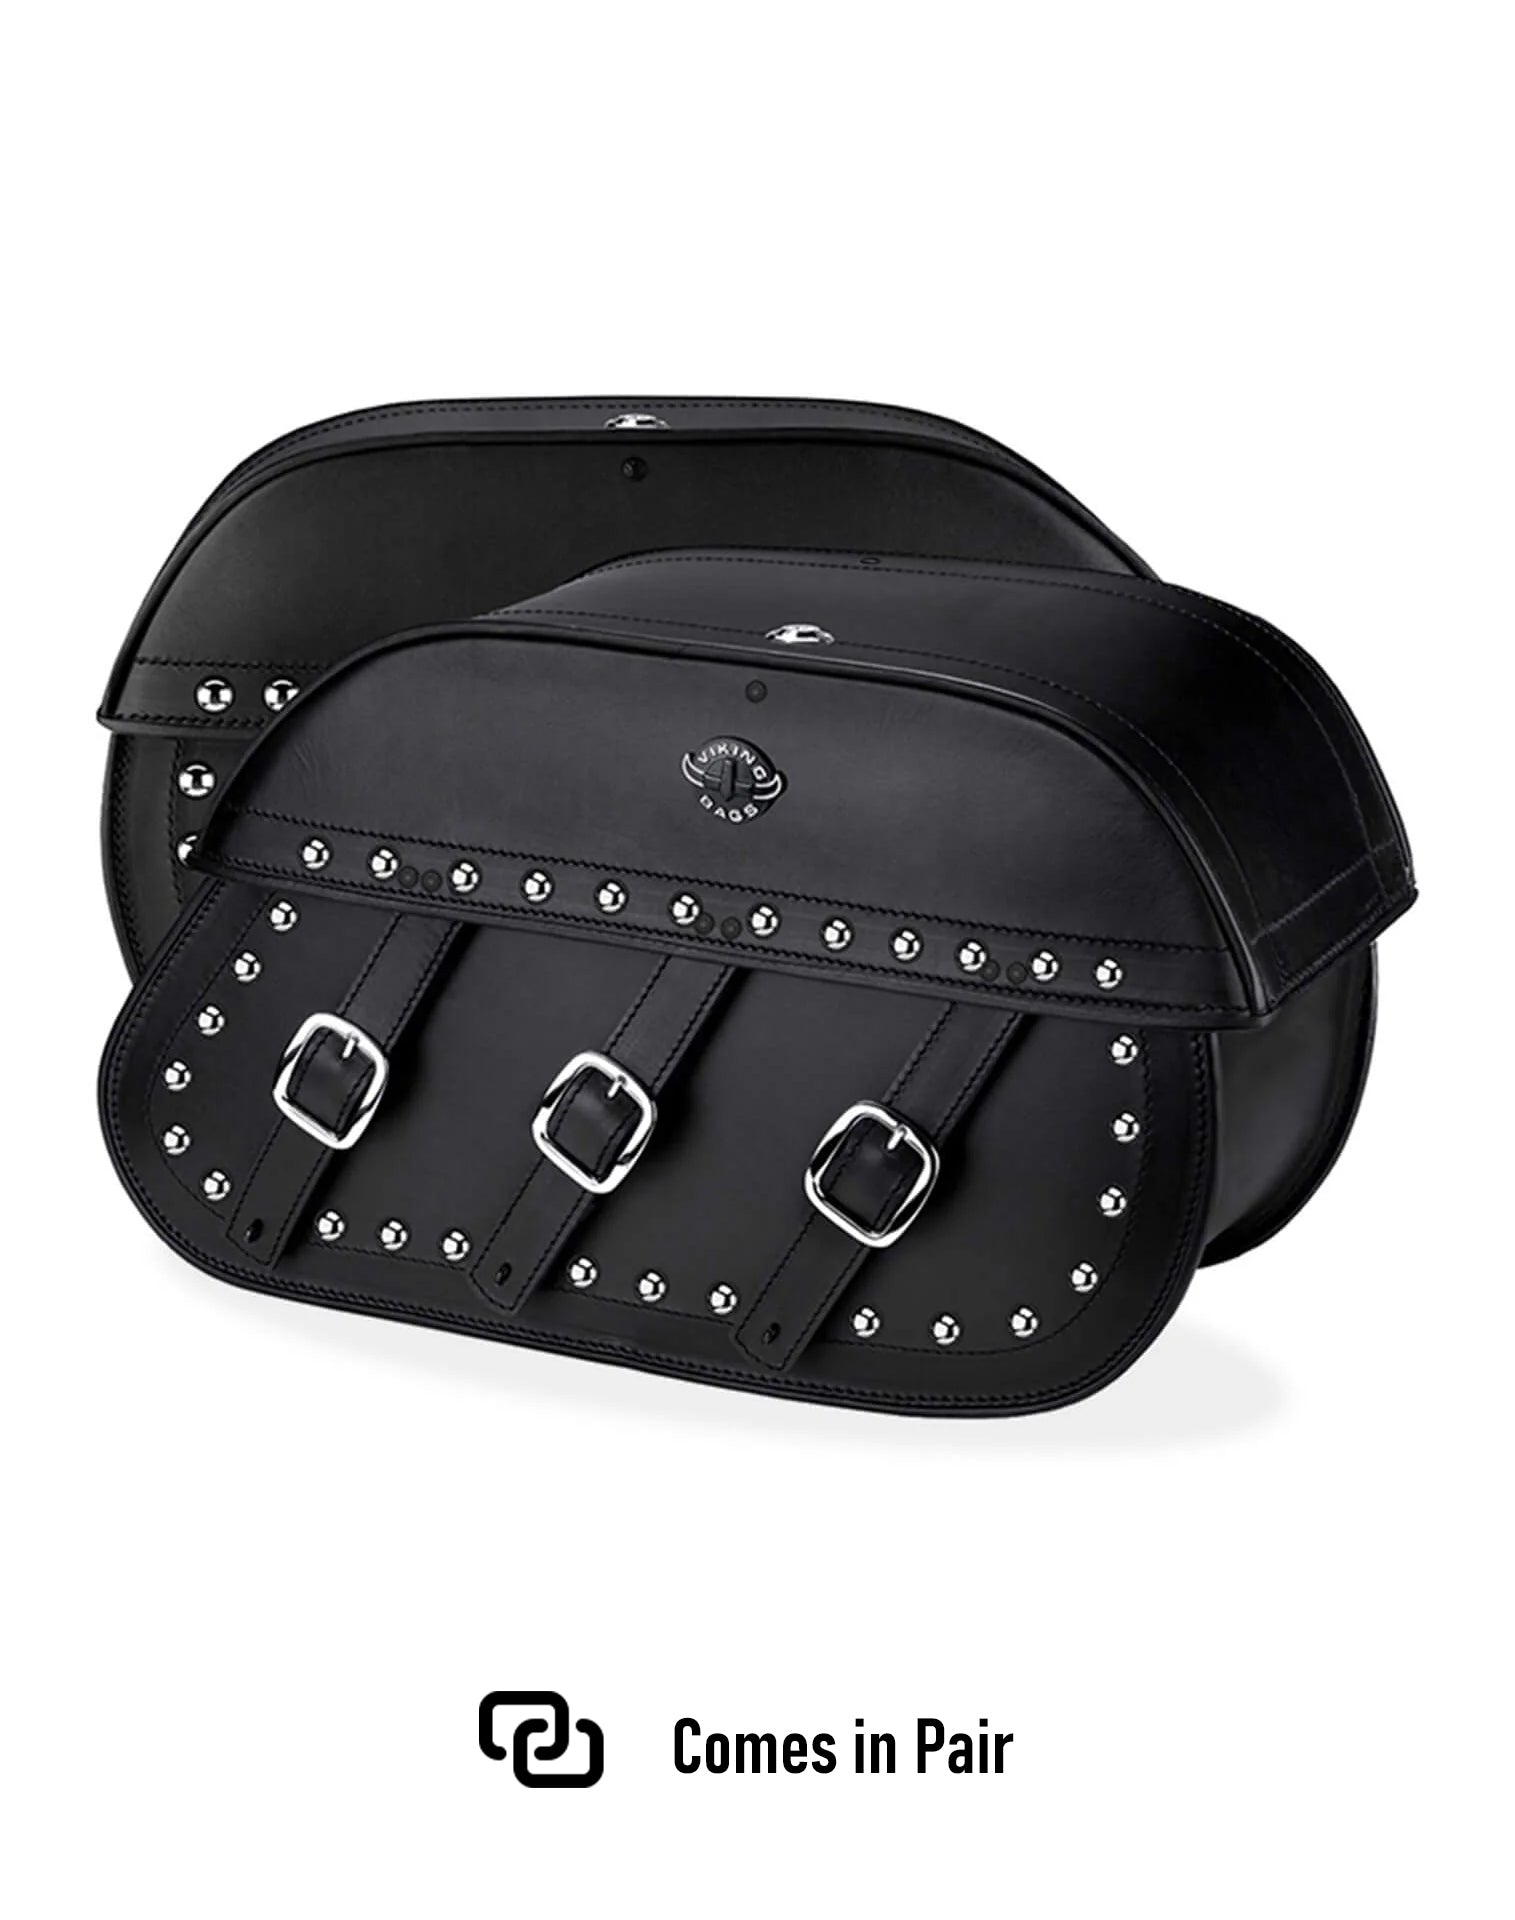 Viking Trianon Extra Large Victory V92C Studded Leather Motorcycle Saddlebags Weather Resistant Bags Comes in Pair